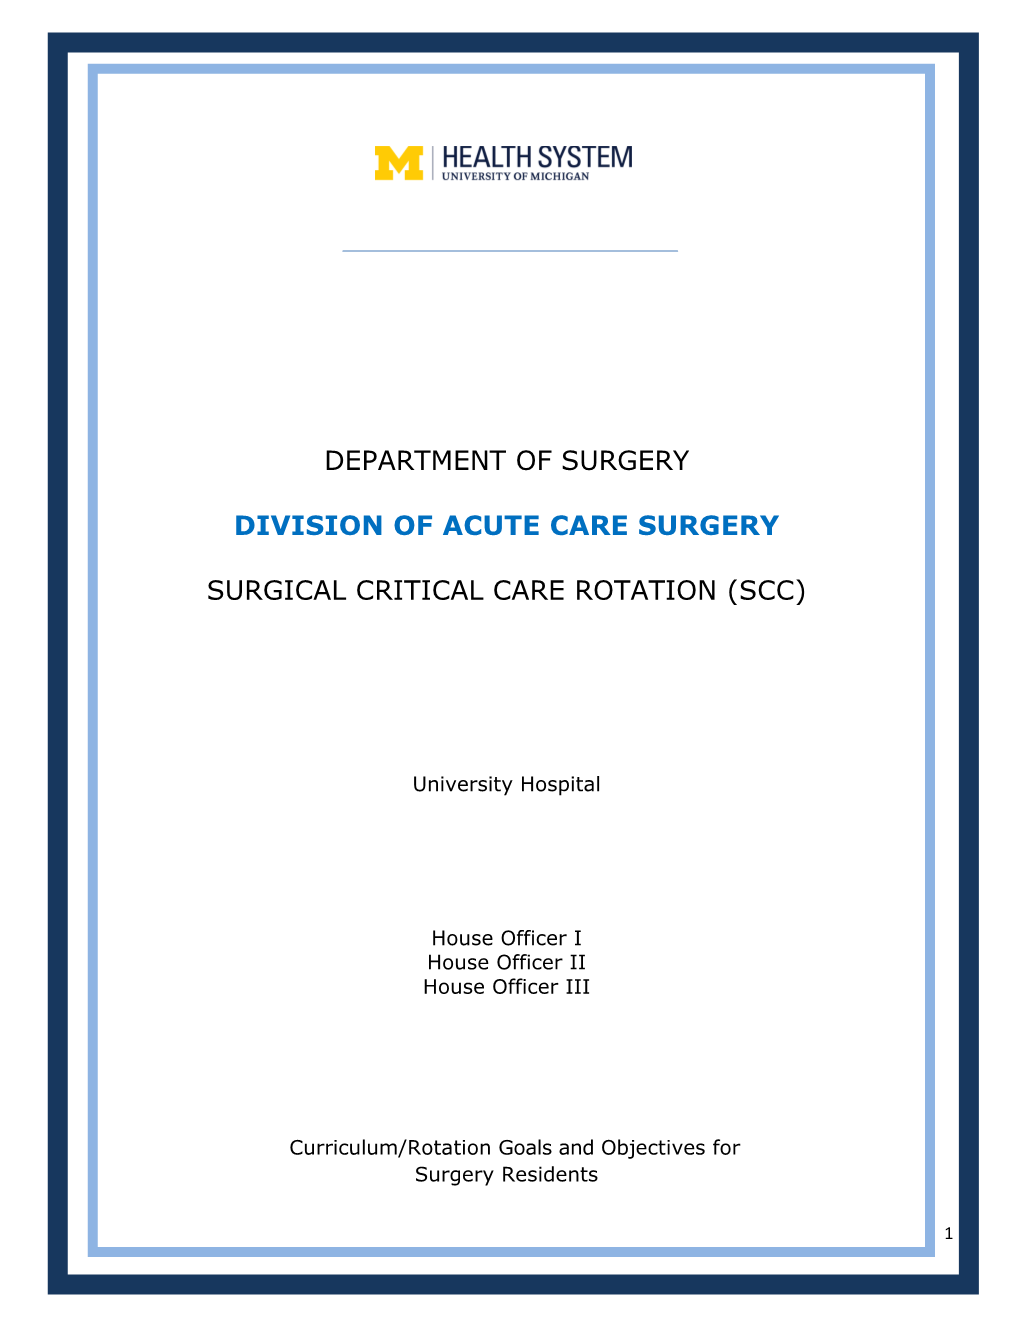 Division of Acute Care Surgery